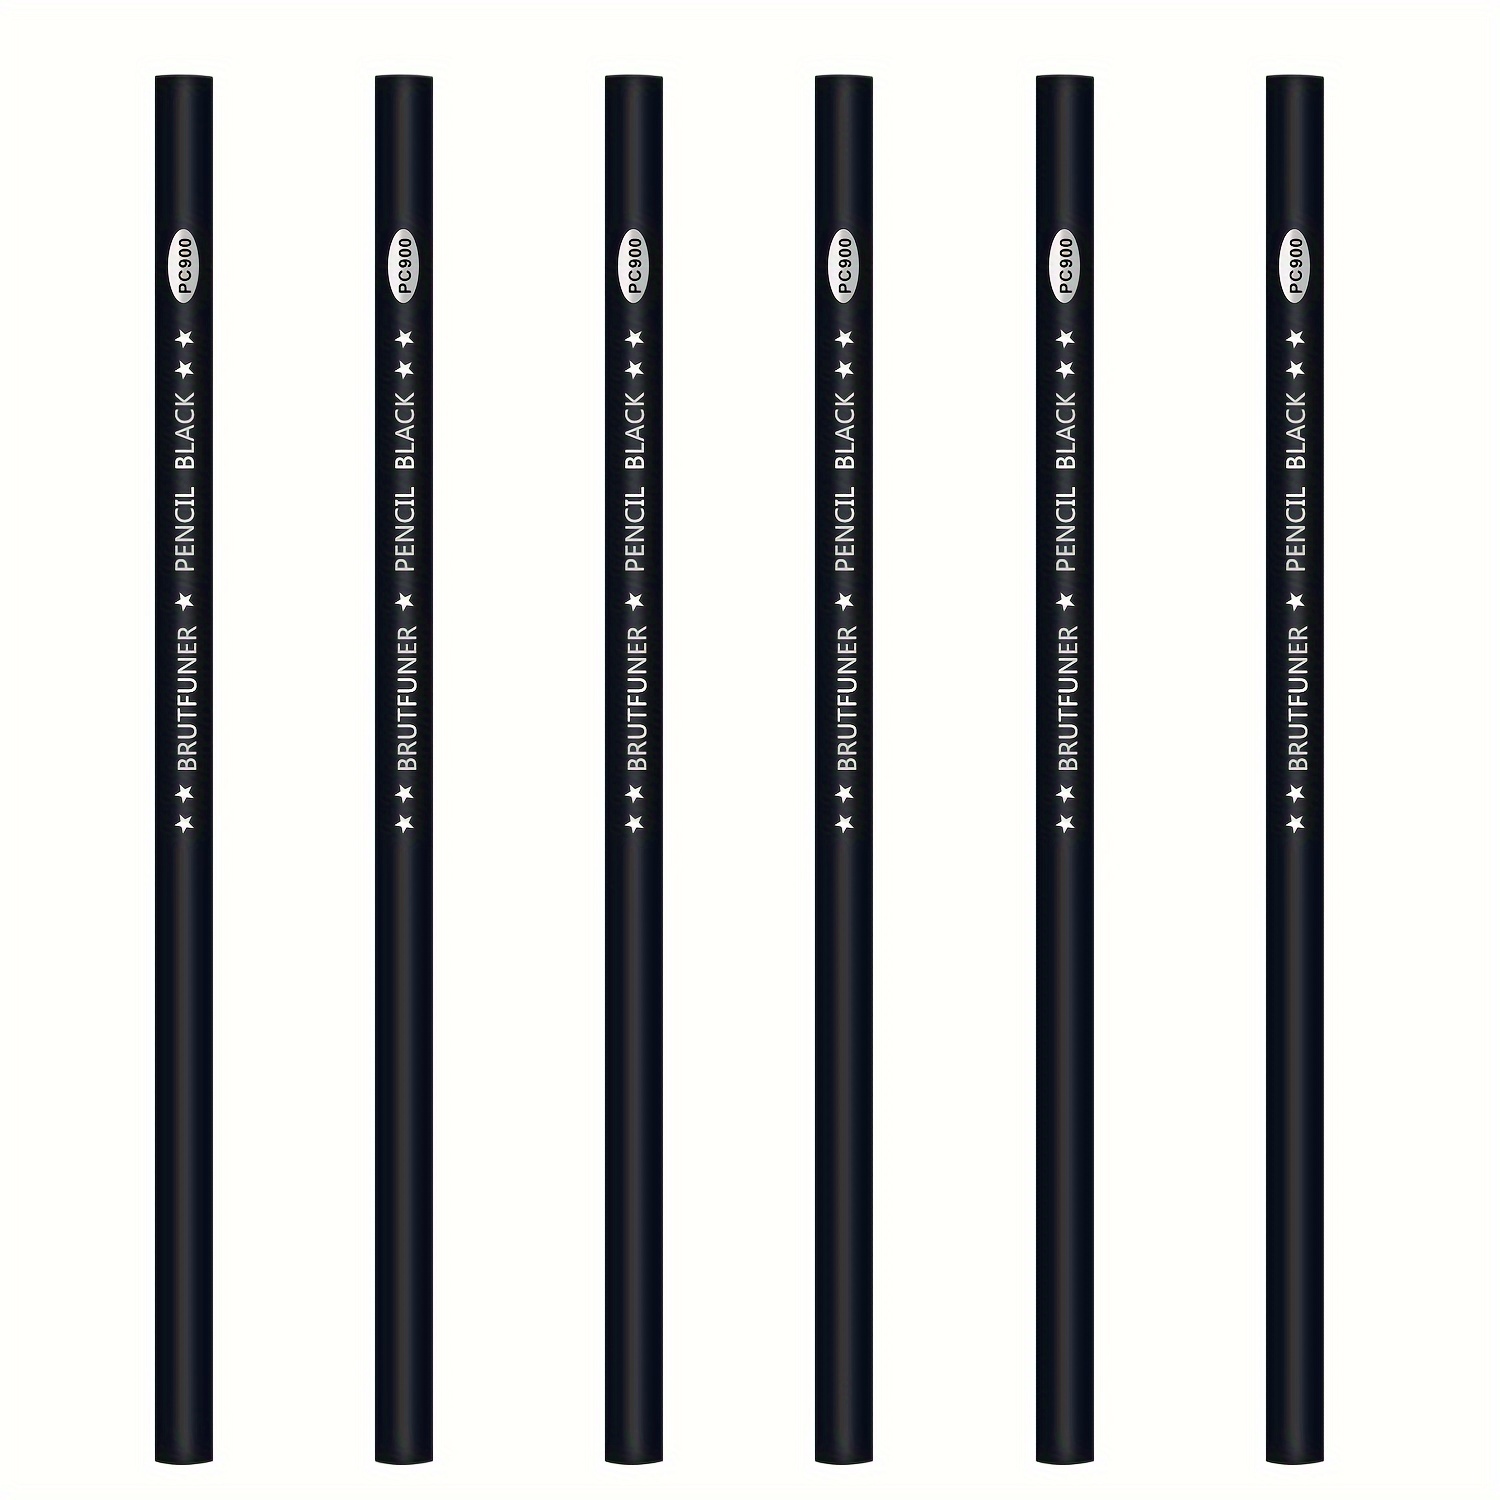 6pcs Black Charcoal Pencils For Sketching - Professional High-quality  Sketching Highlights Artist Pencils For Painting, Sketching, Coloring,  Beginners